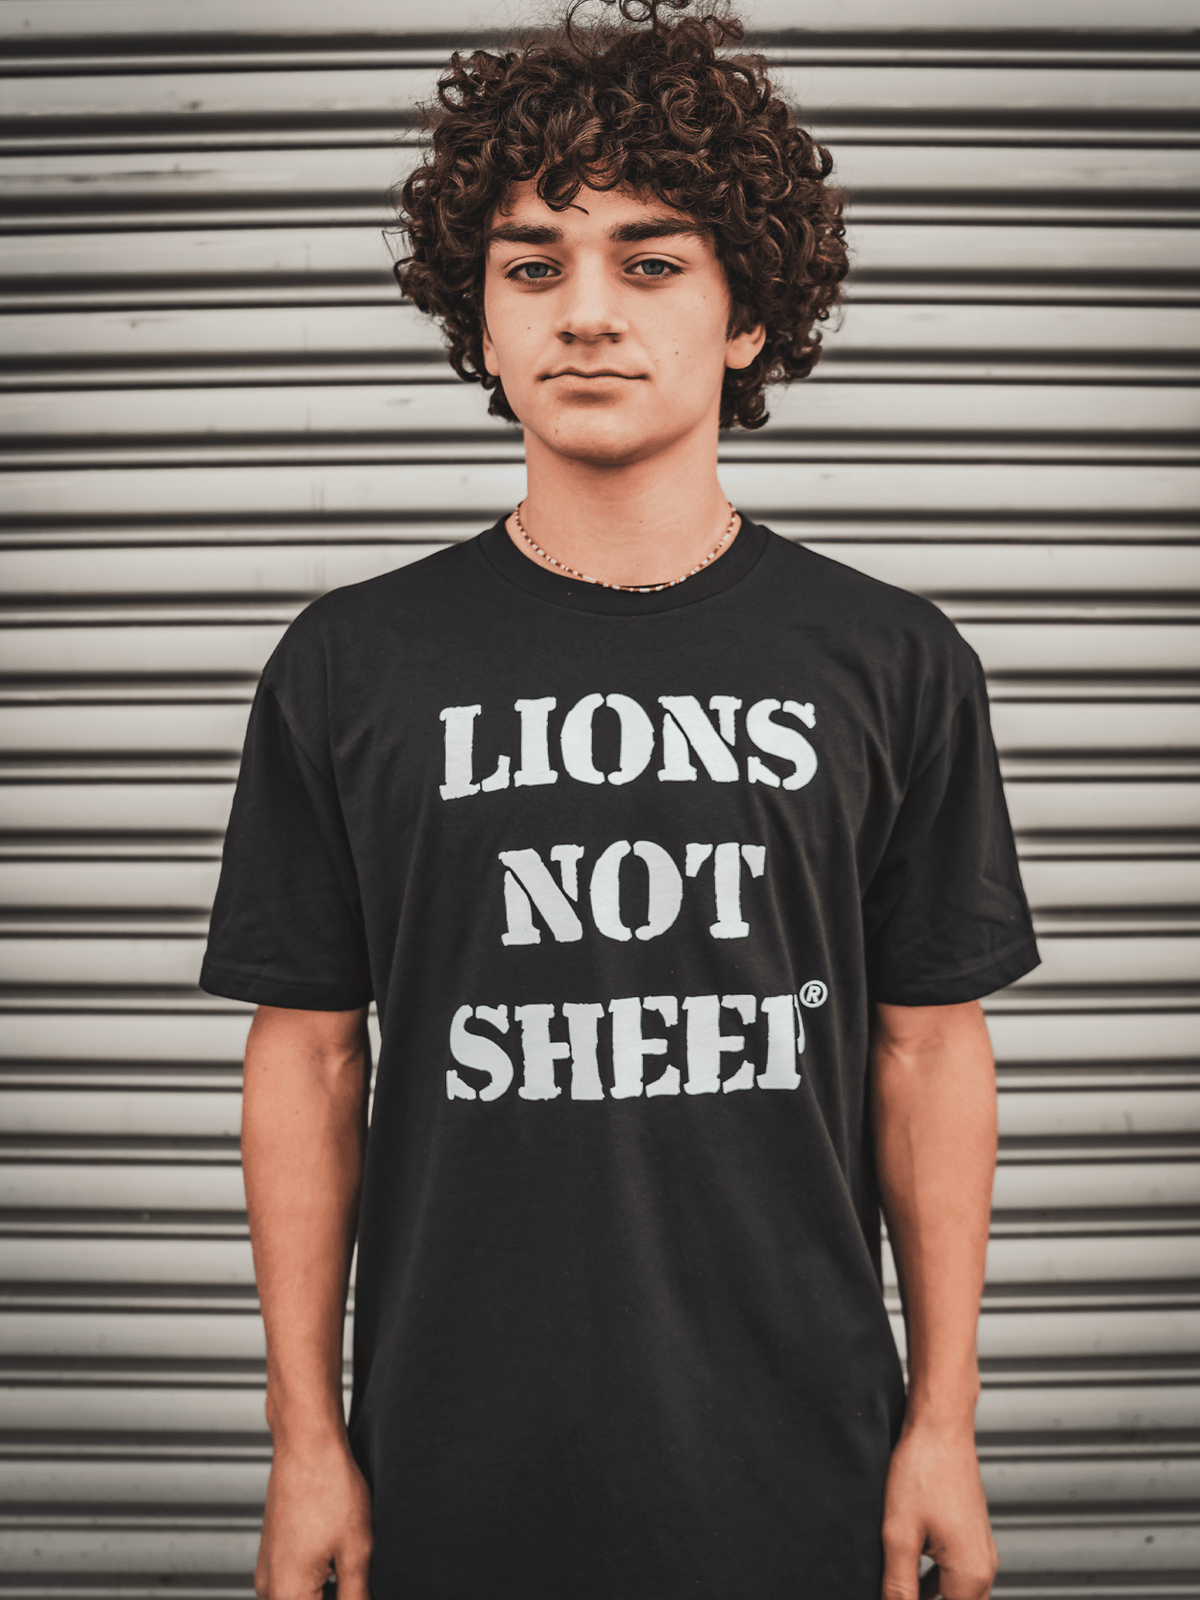 LIONS NOT SHEEP OG Youth Tee - Lions Not Sheep ®